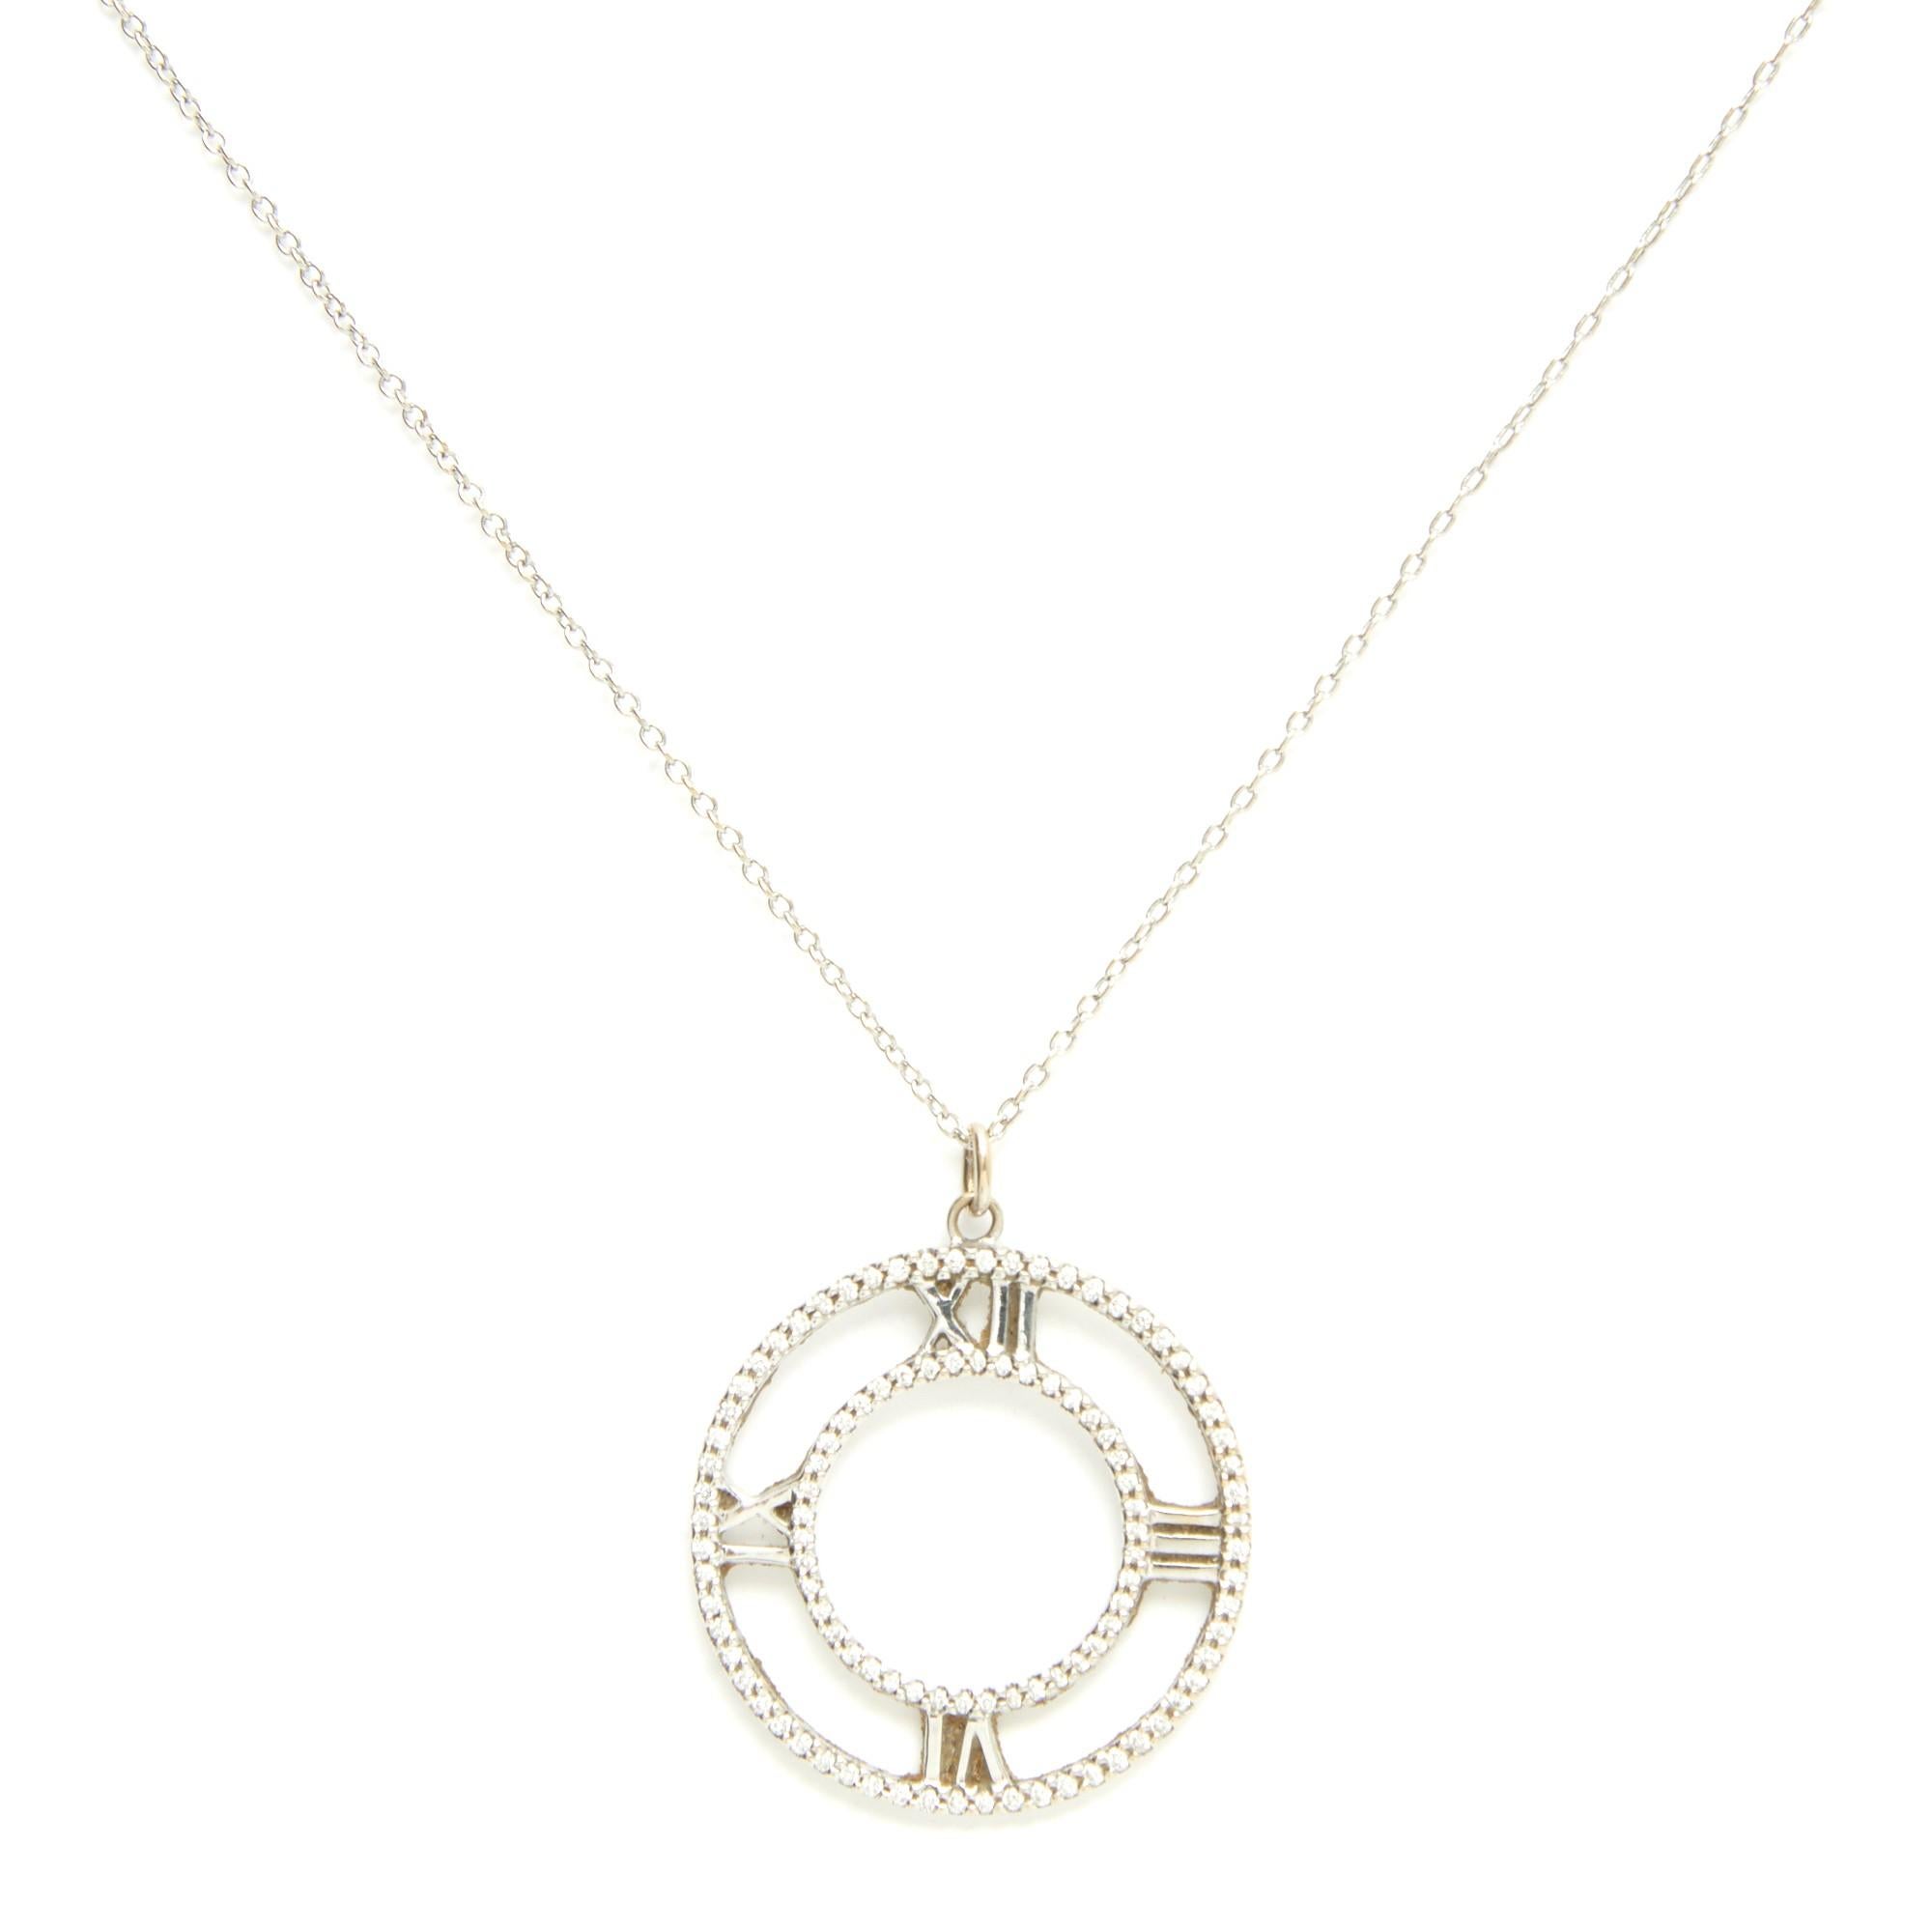 Tiffany & Co Atlas model necklace in 18-carat white gold, composed of a chain and a Small-sized pendant encrusted with brilliant-cut diamonds. Length of open necklace 59.7 cm, diameter of pendant 2.9 cm, weight of brilliants 0.14 carats. The